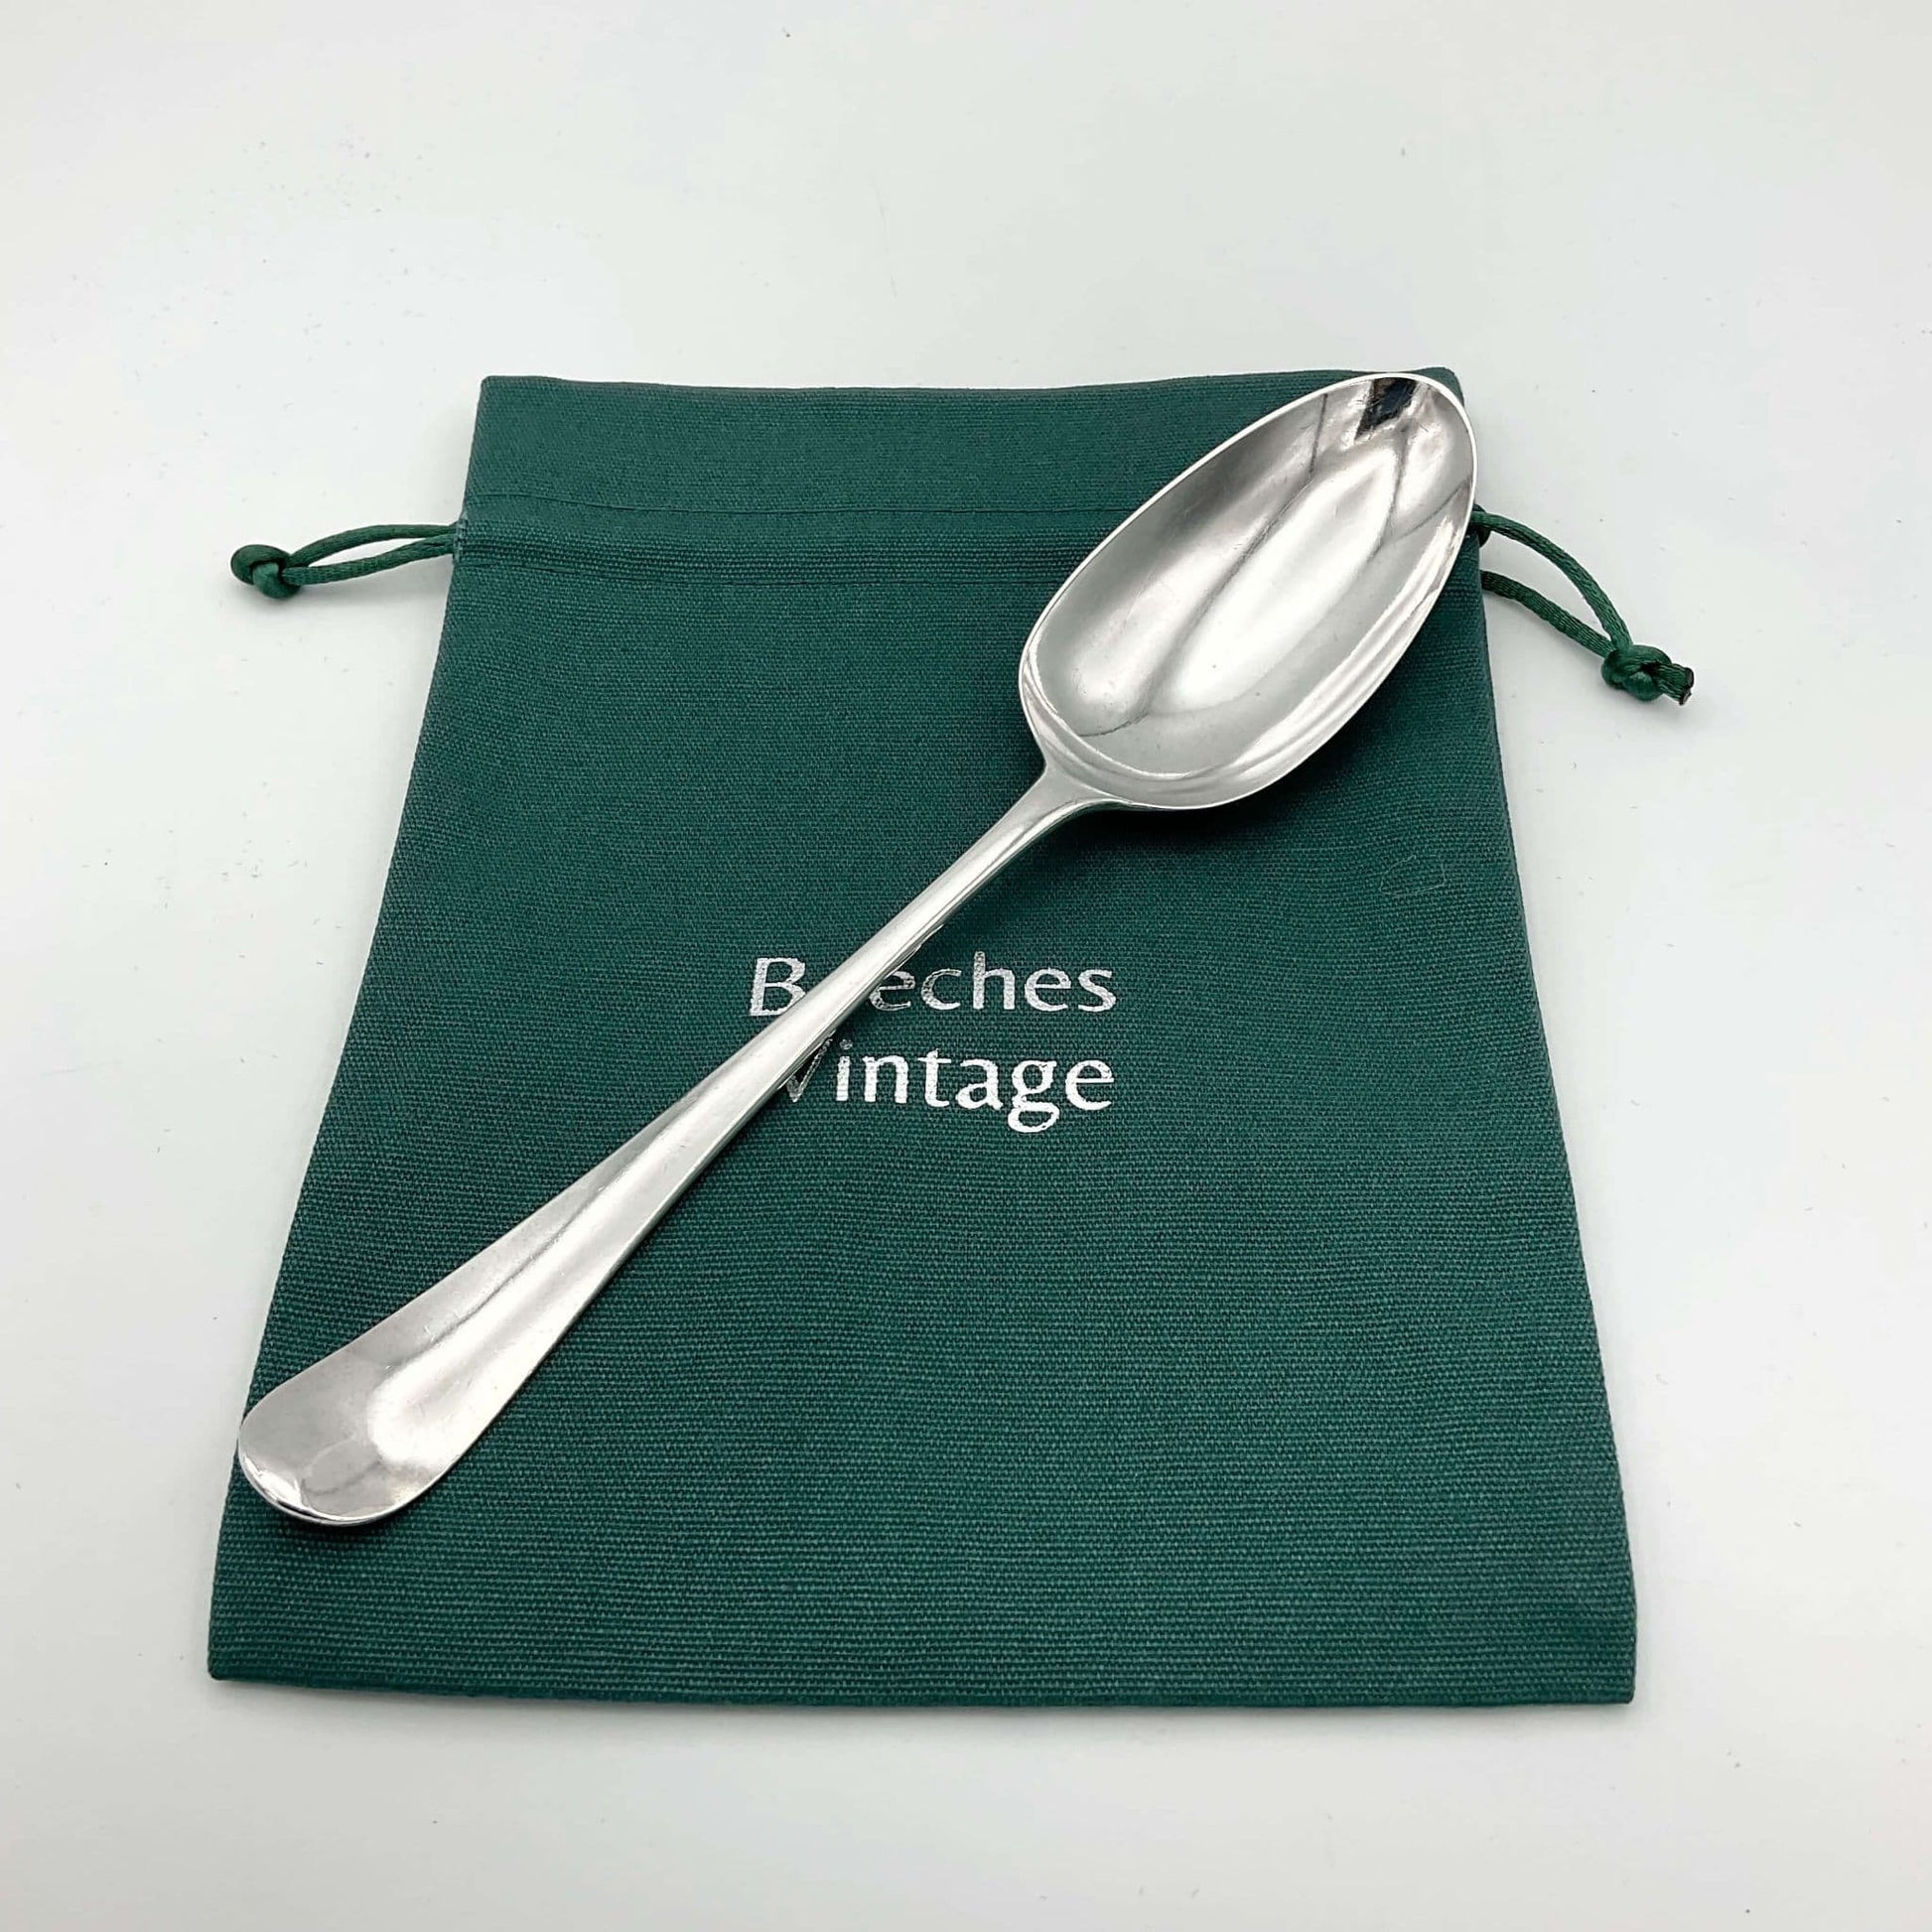 Antique silver serving spoon on a green cotton bag 